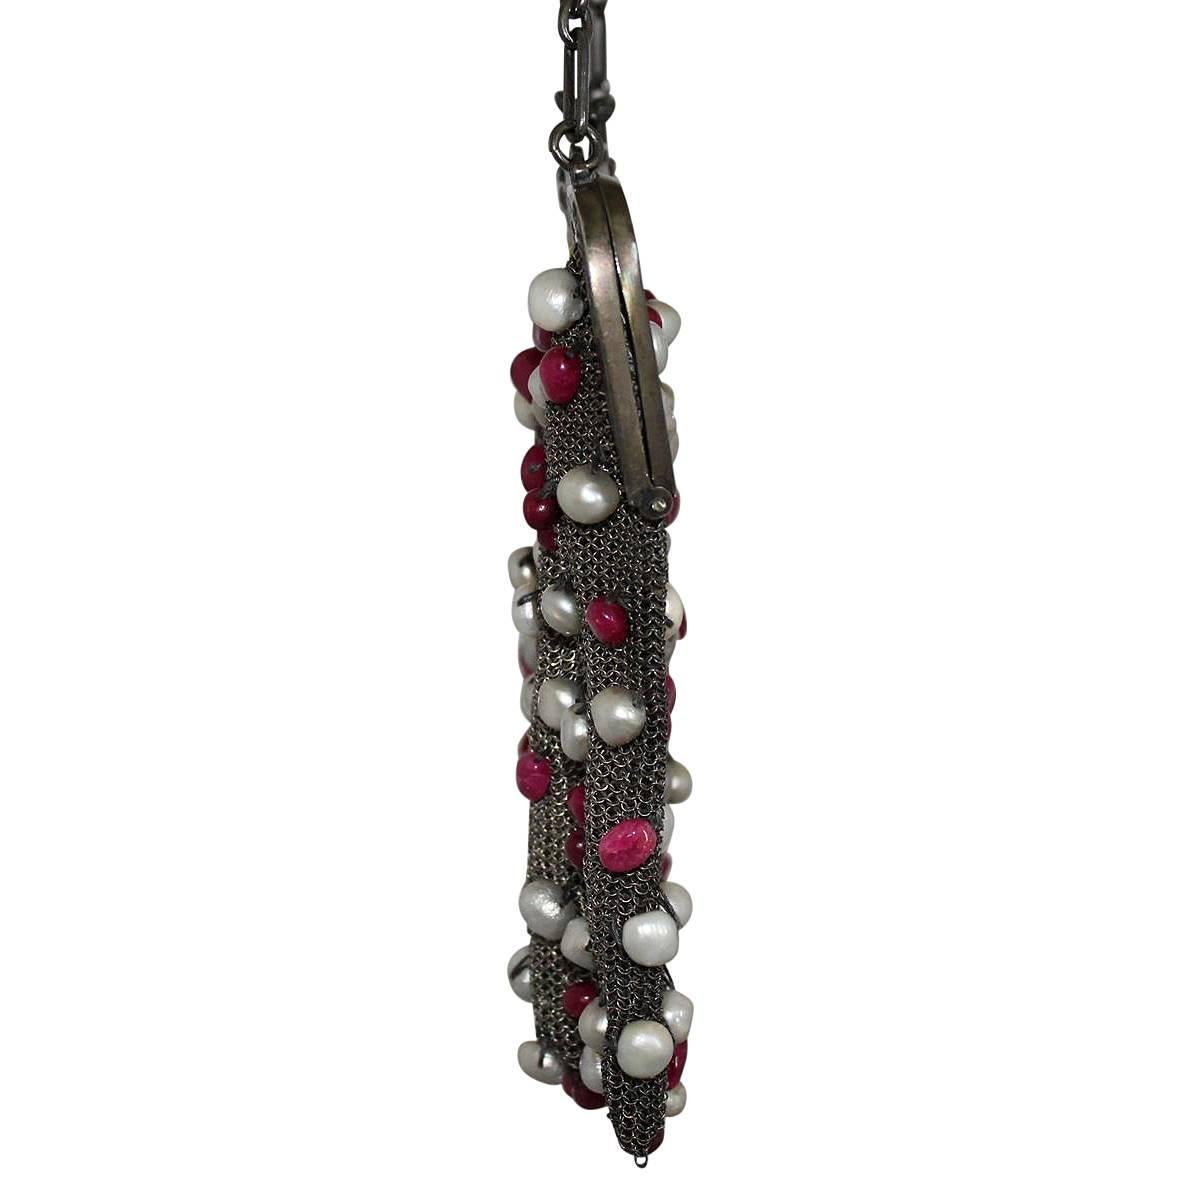 Amazing jewel pochette by Marta Marzotto
Silver metal net
Stunning stones application
Baroque pearls
Ruby
Silver chain
Cm 22 x 16 (8.6 x 6.3 inches)
Unique piece, without tag as usual
Made in Italy
Worldwide express shipping included in the